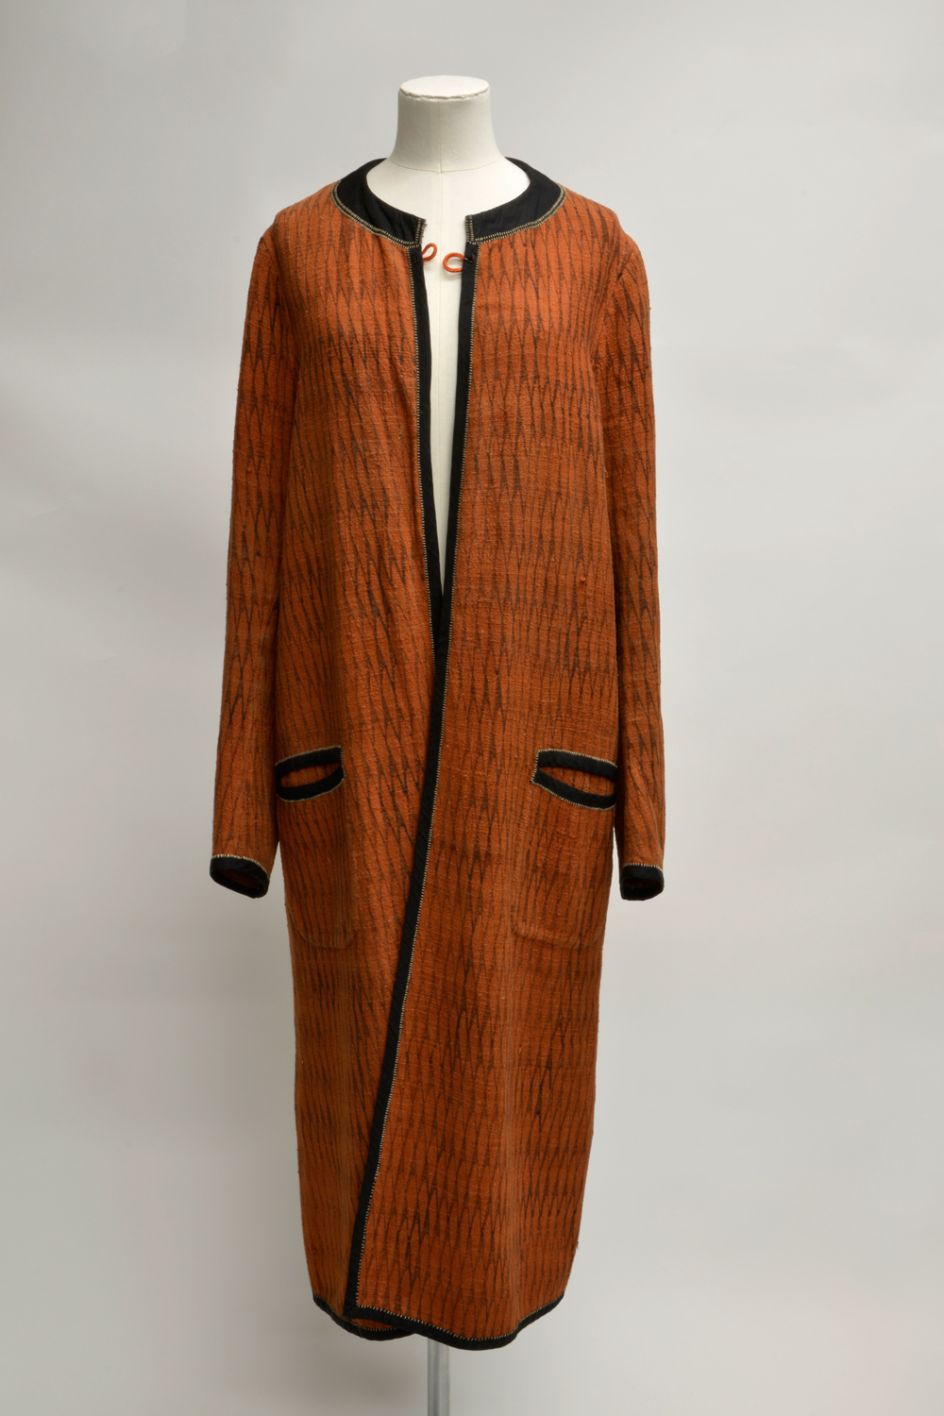 Barron and Larcher Jacket. Courtesy Ditchling Museum of Art + Craft